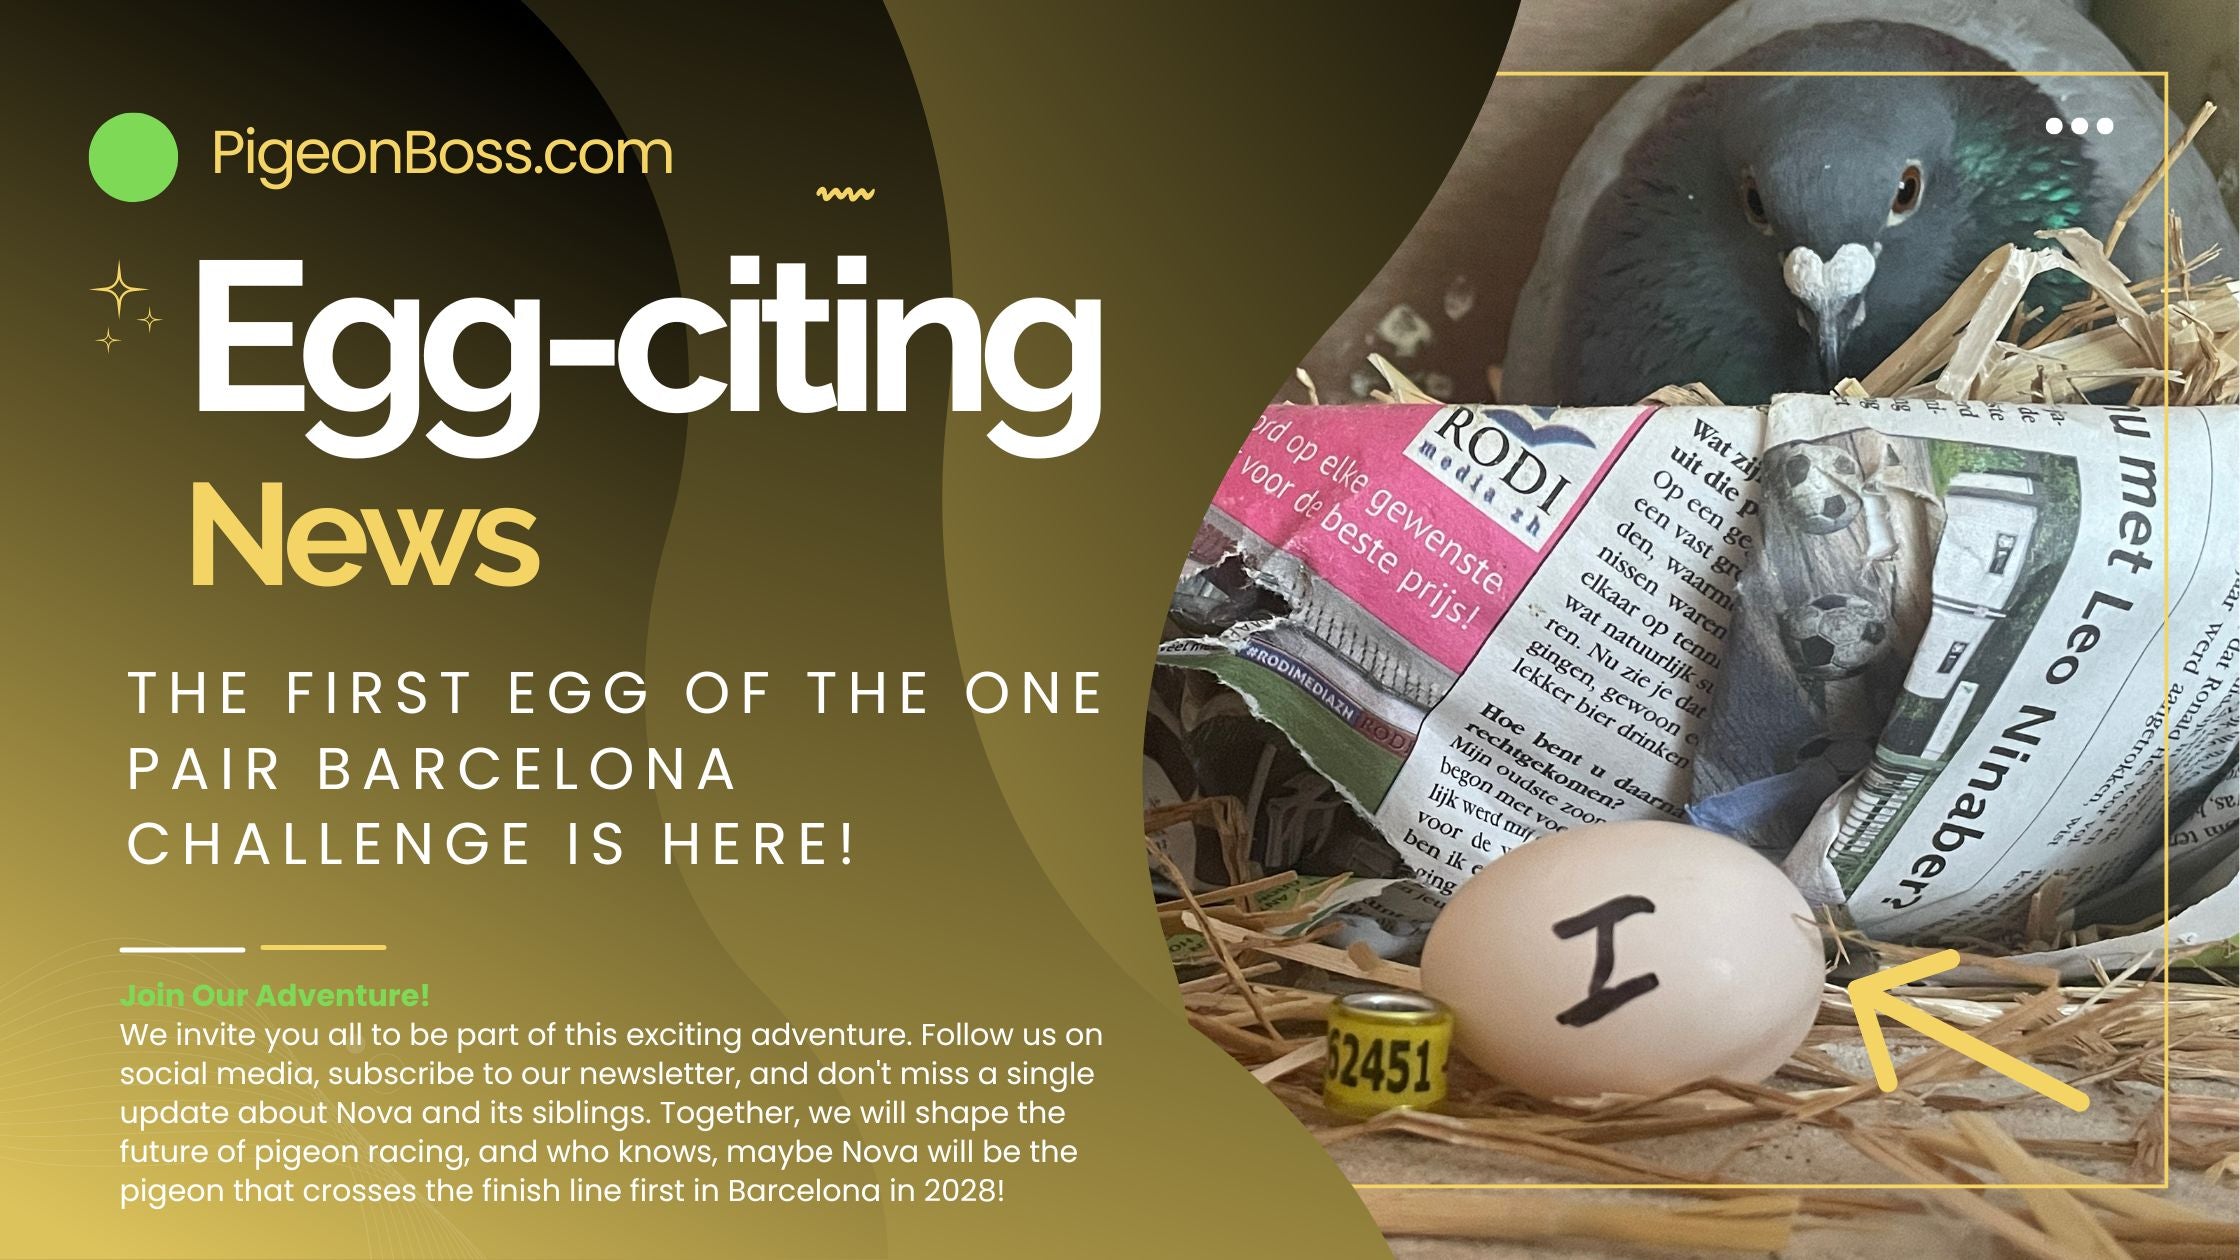 Egg-citing News: The First Egg of the One Pair Barcelona Challenge is Here!